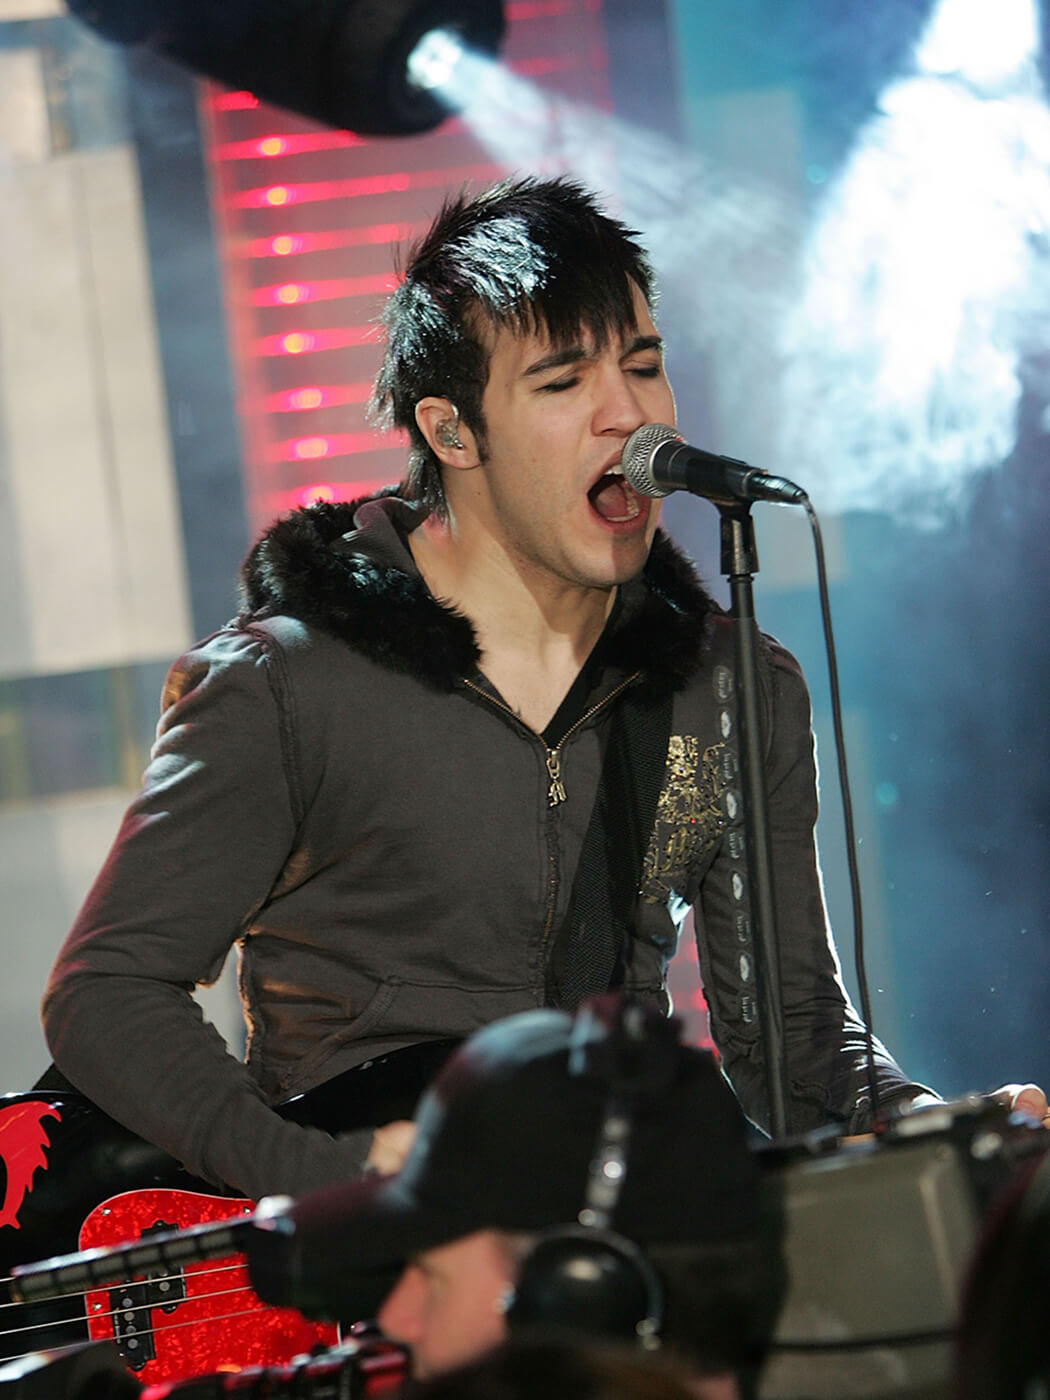 Pete Wentz of Fall Out Boy performing at MTV’s Total Request Live as part of “Infinity Flight 206 With Fall Out Boy” in 2007, by Scott Gries/Getty Images